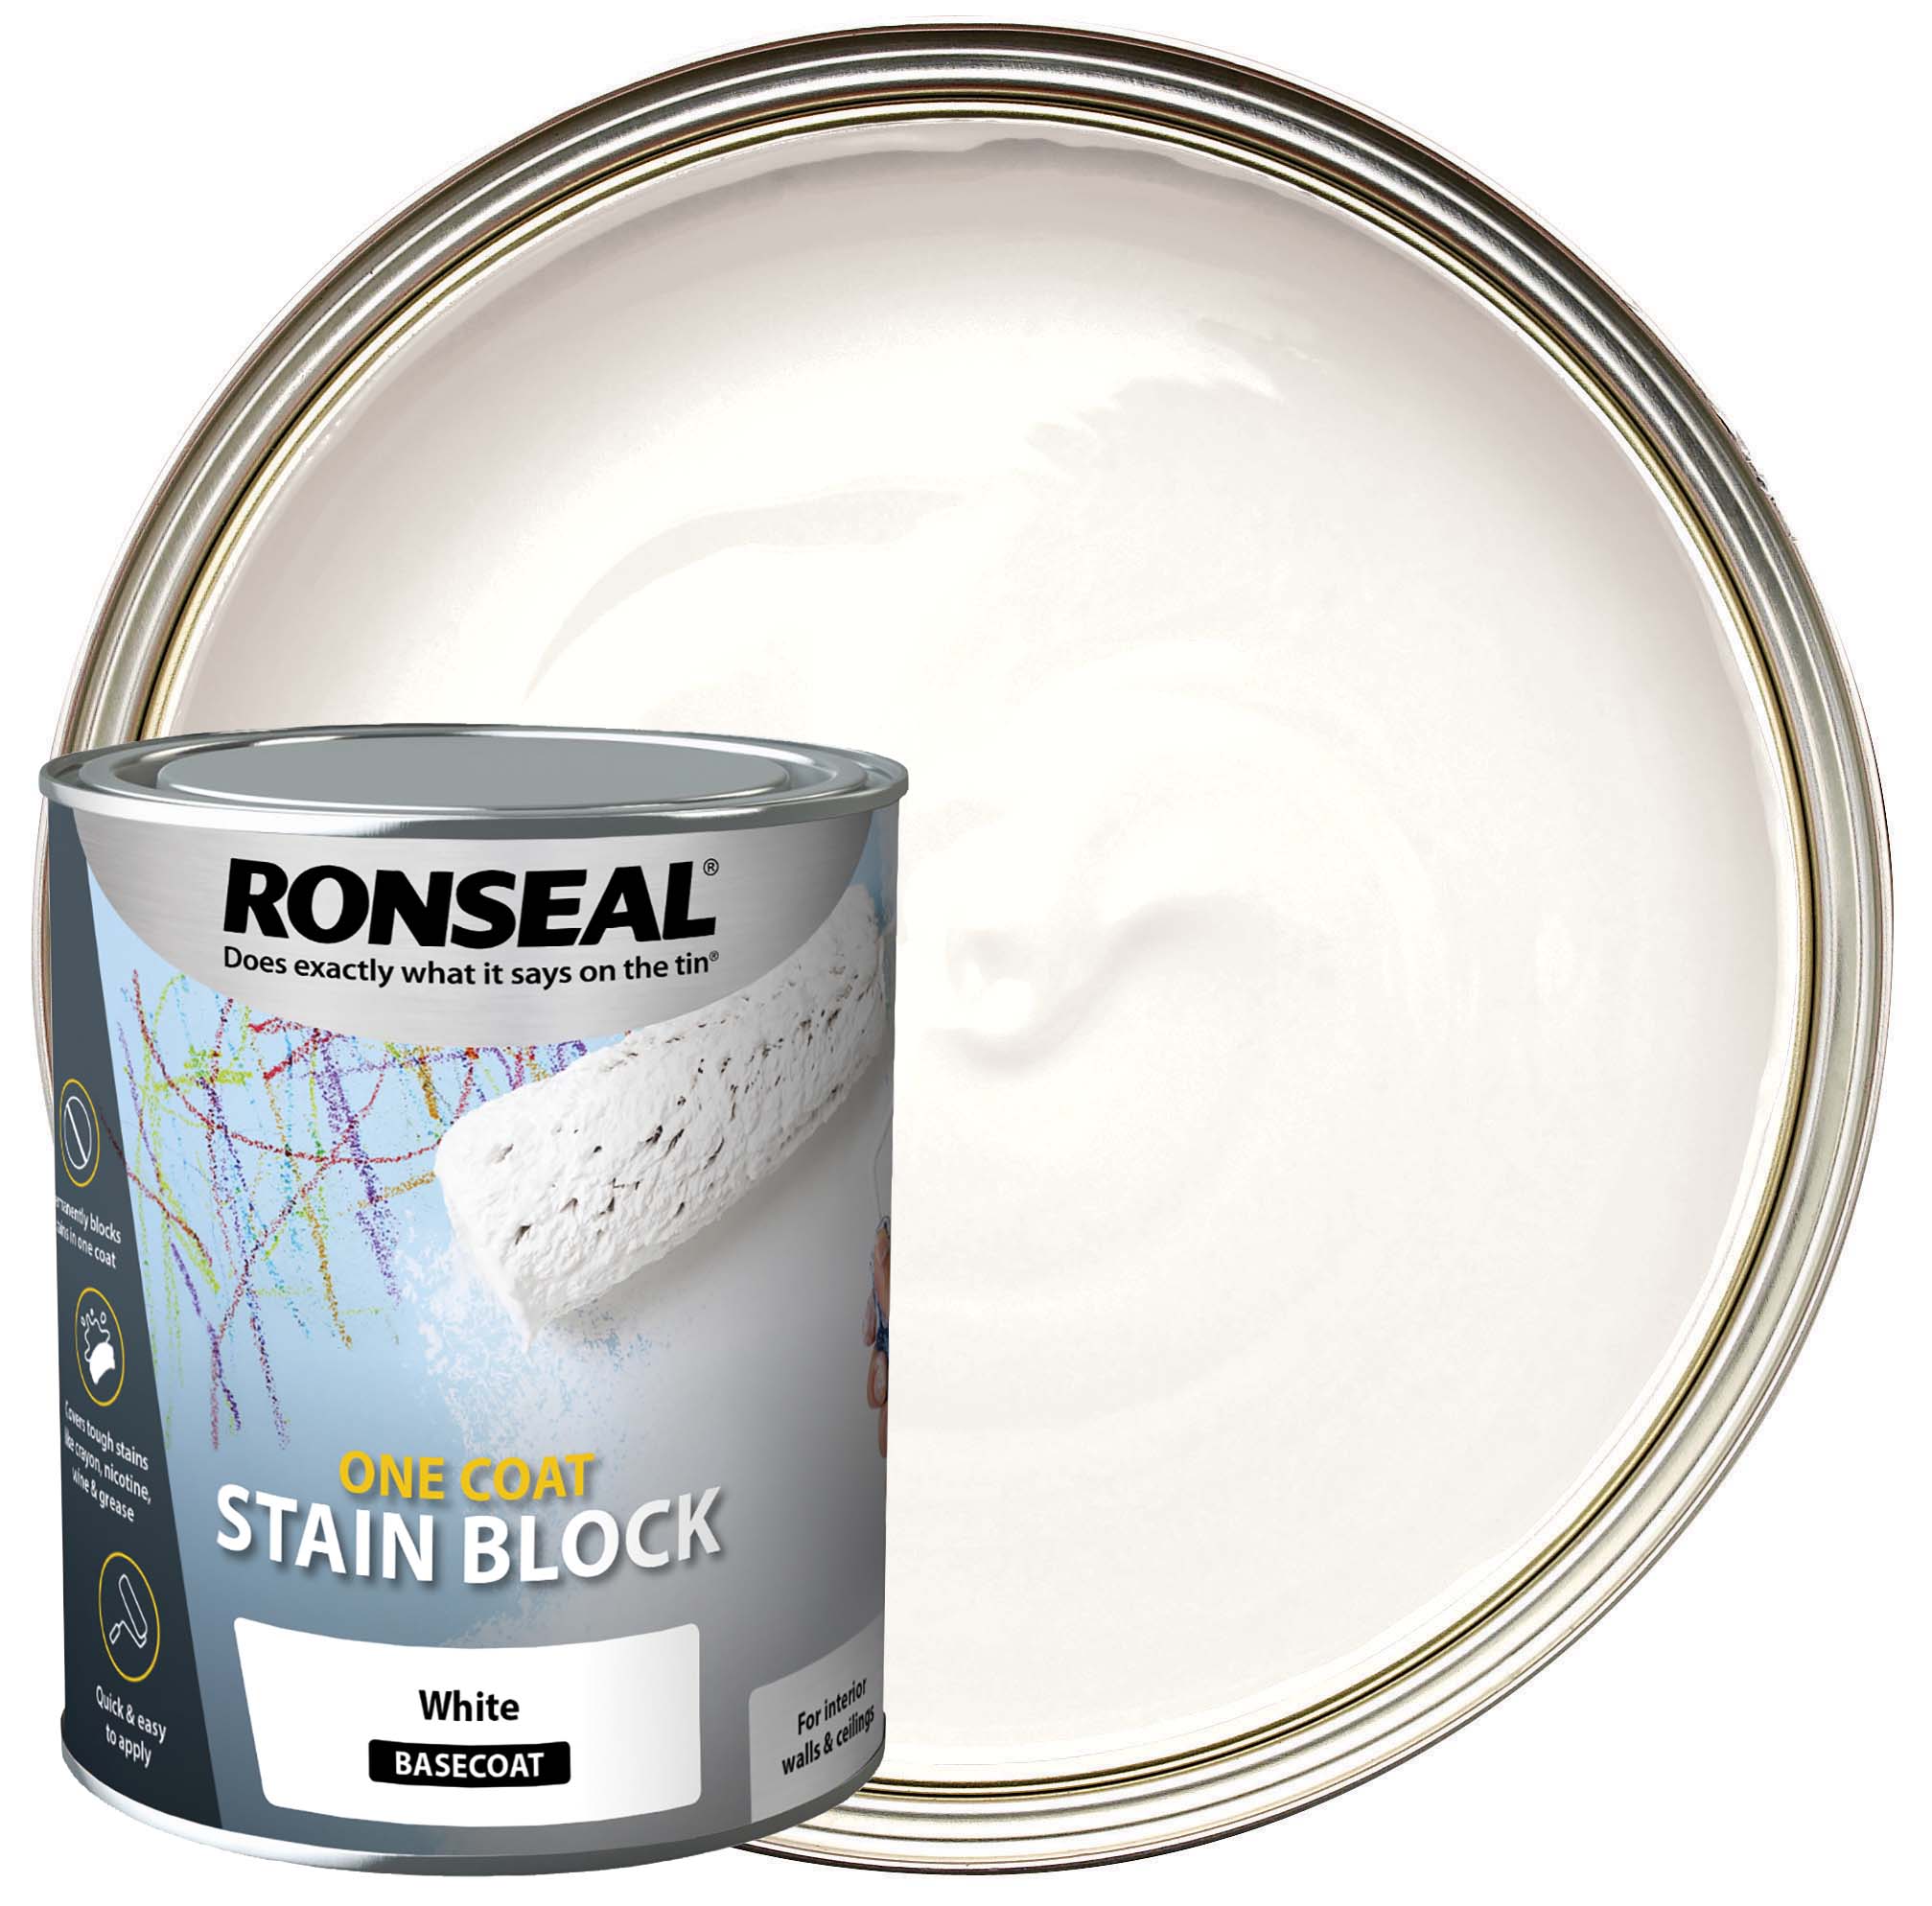 Image of Ronseal One Coat Stain Block White 750ml